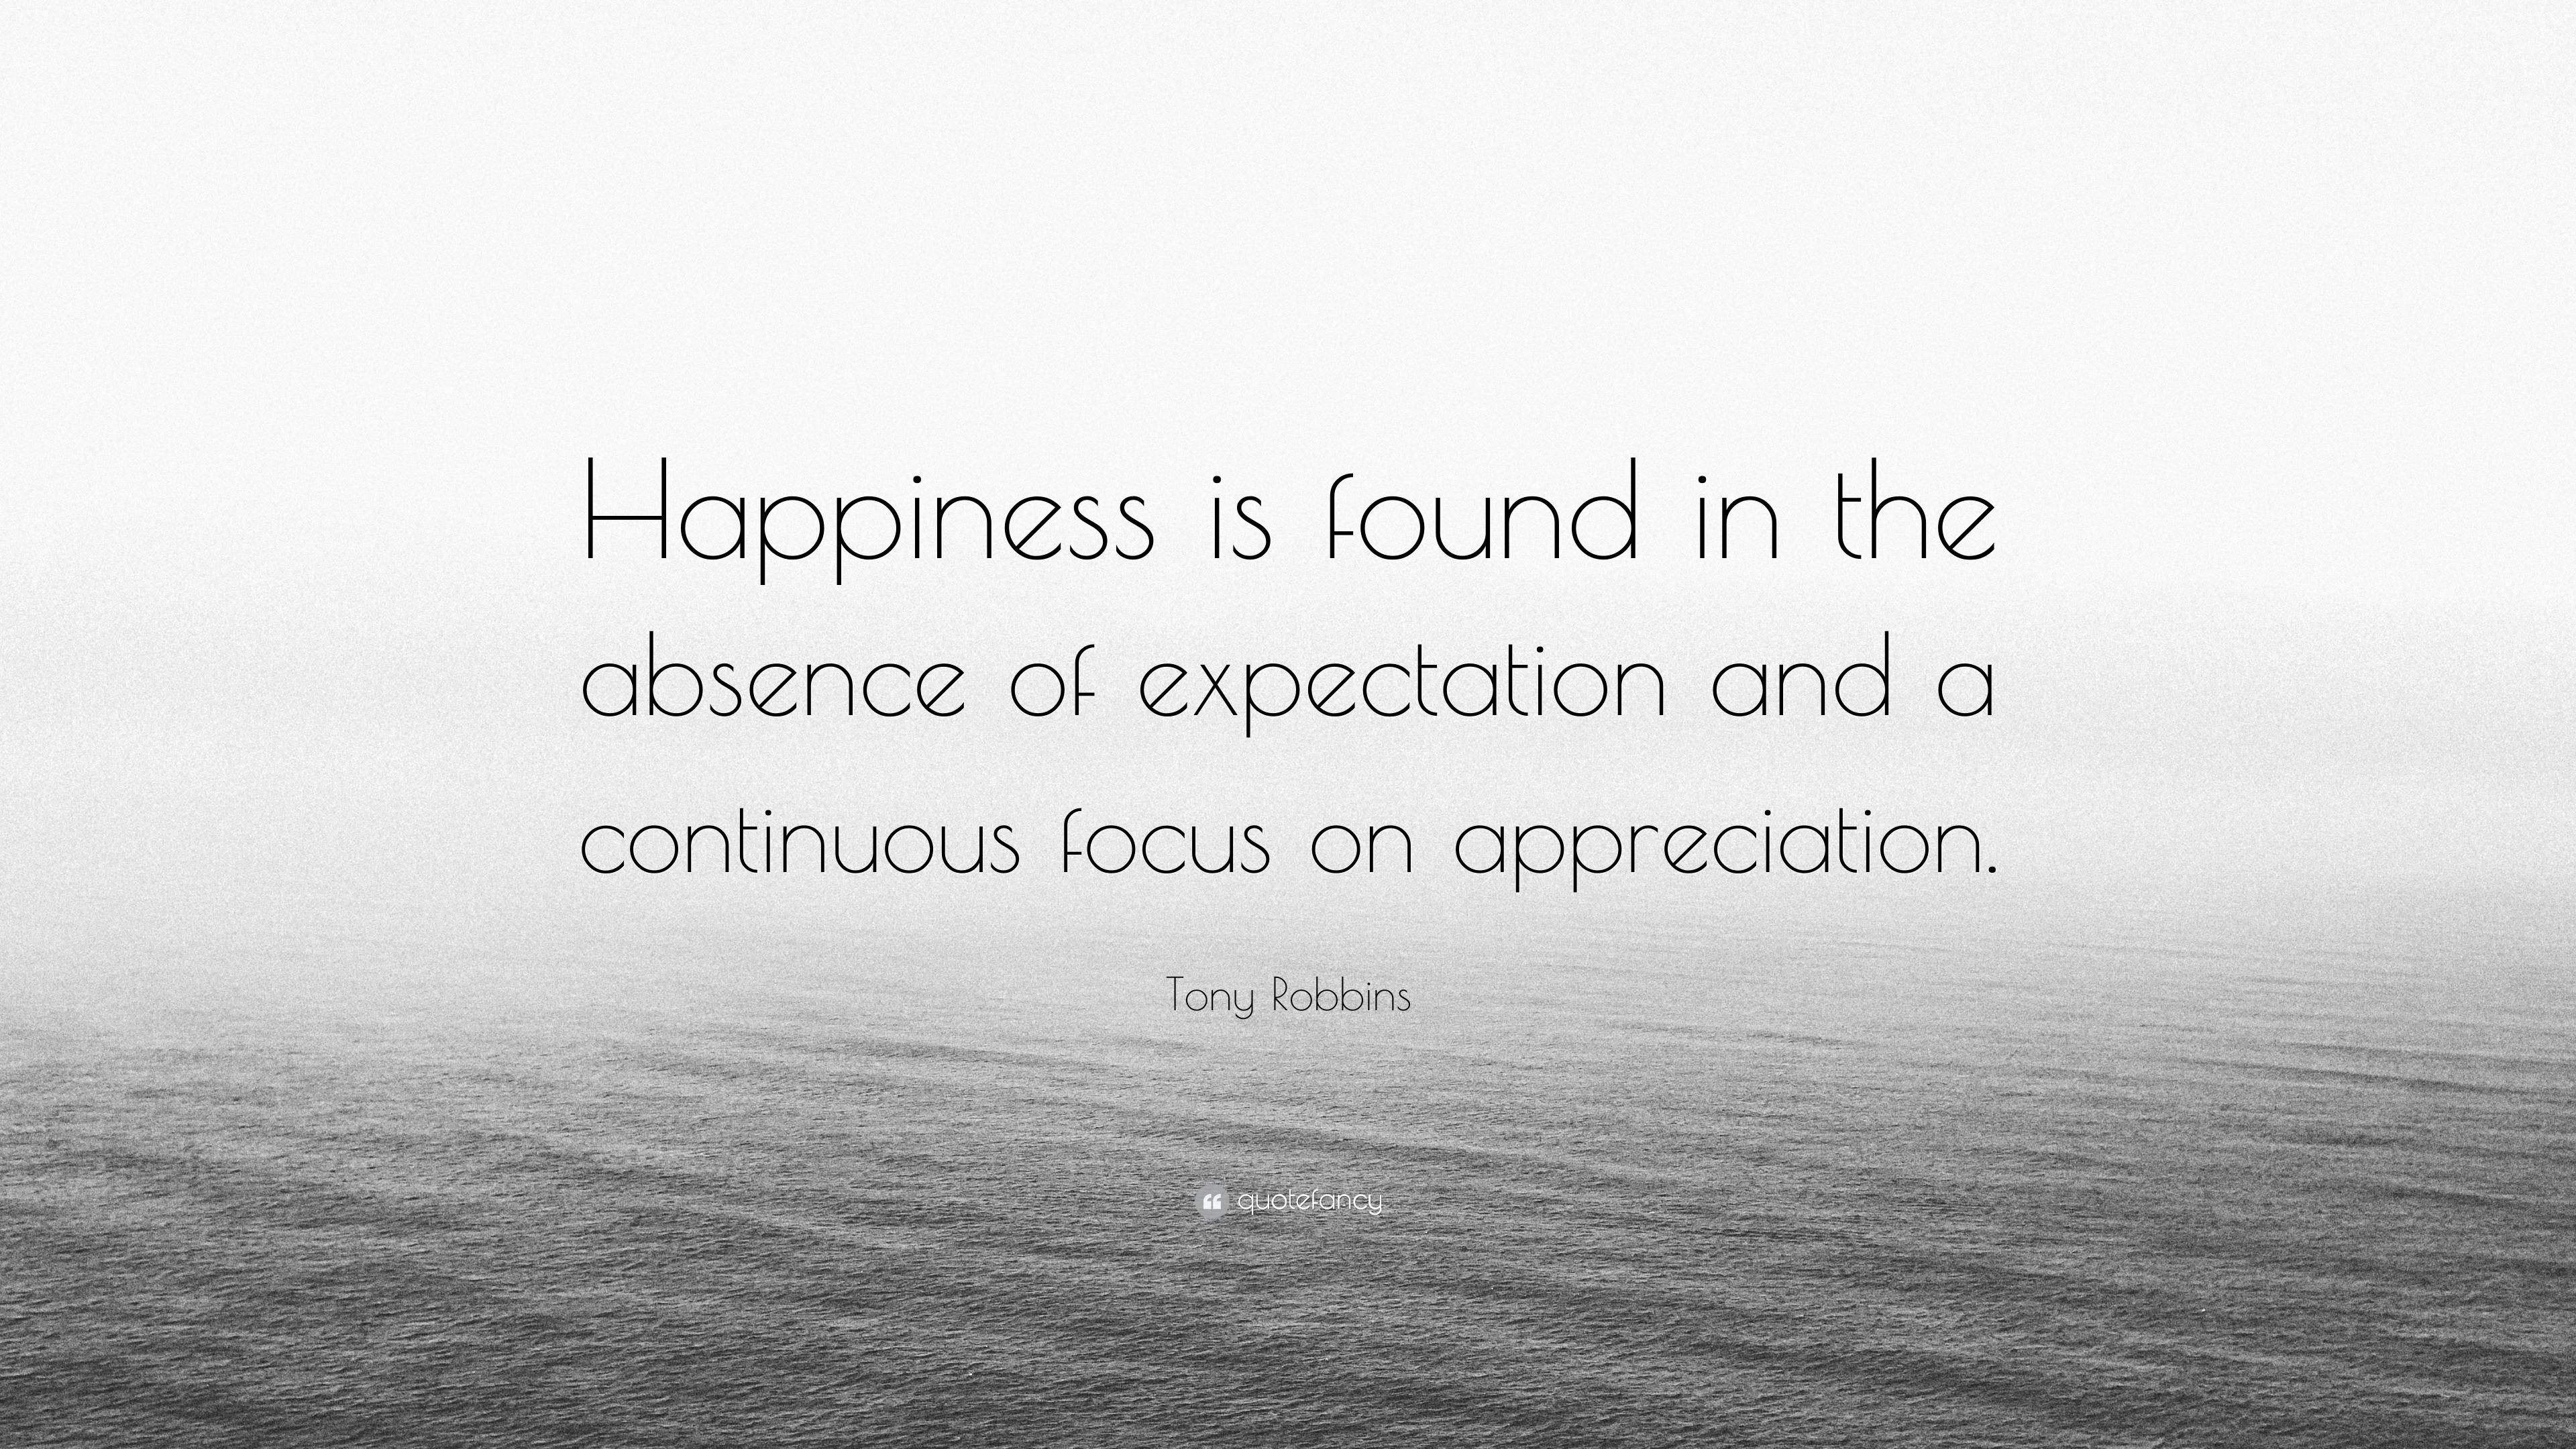 Tony Robbins Quote Happiness Is Found In The Absence Of Expectation And A Continuous Focus On Appreciation 12 Wallpapers Quotefancy